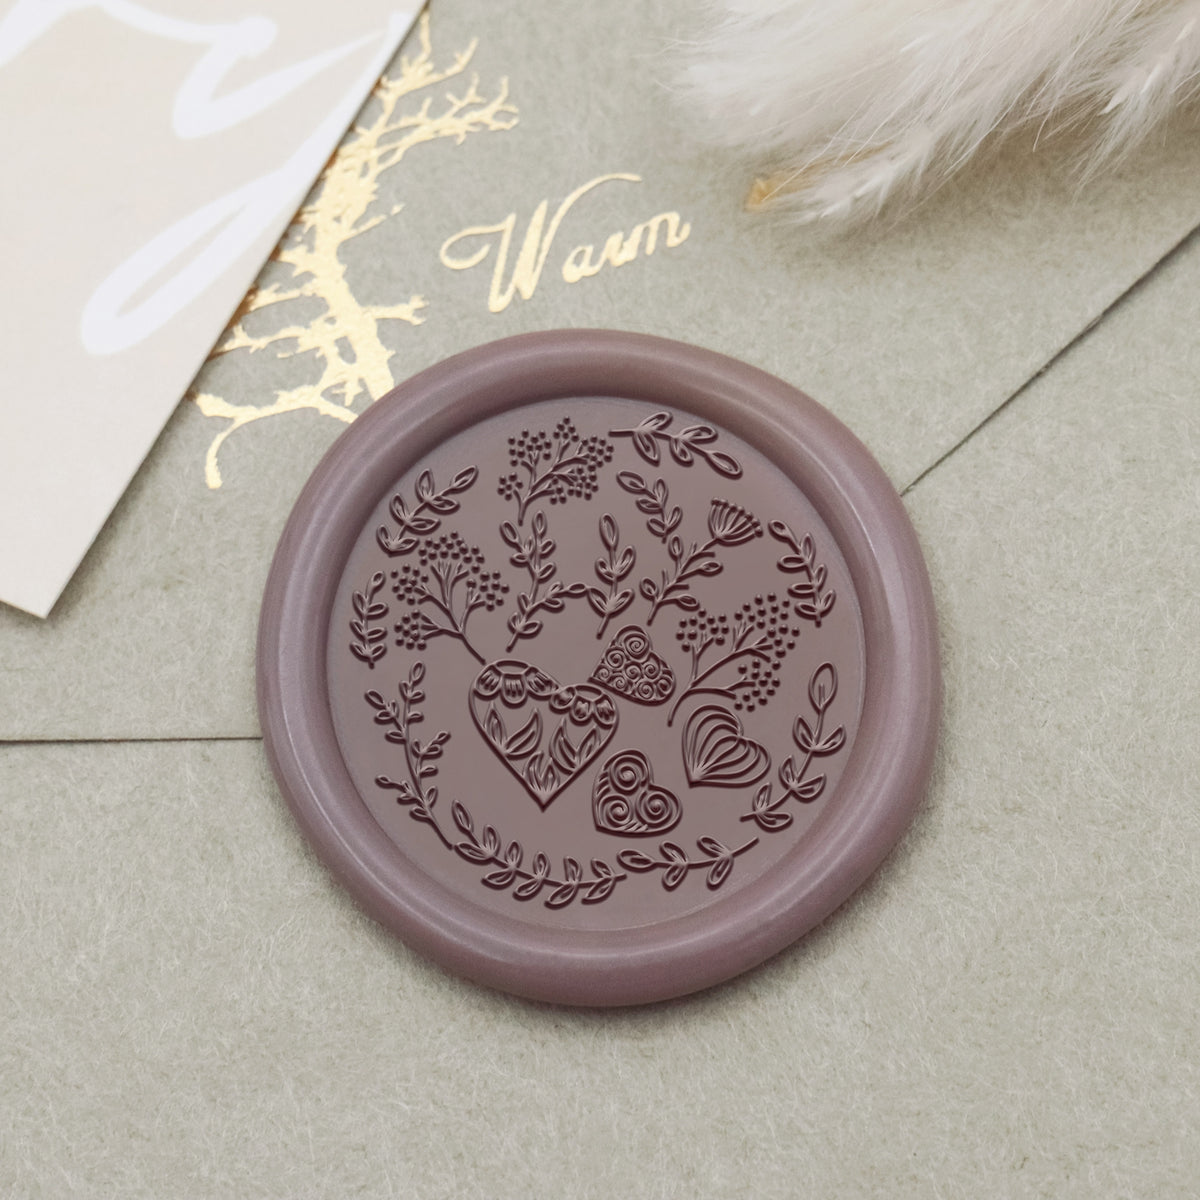 Floral Tile Pattern Wax Seal Stamp - Style 4 1